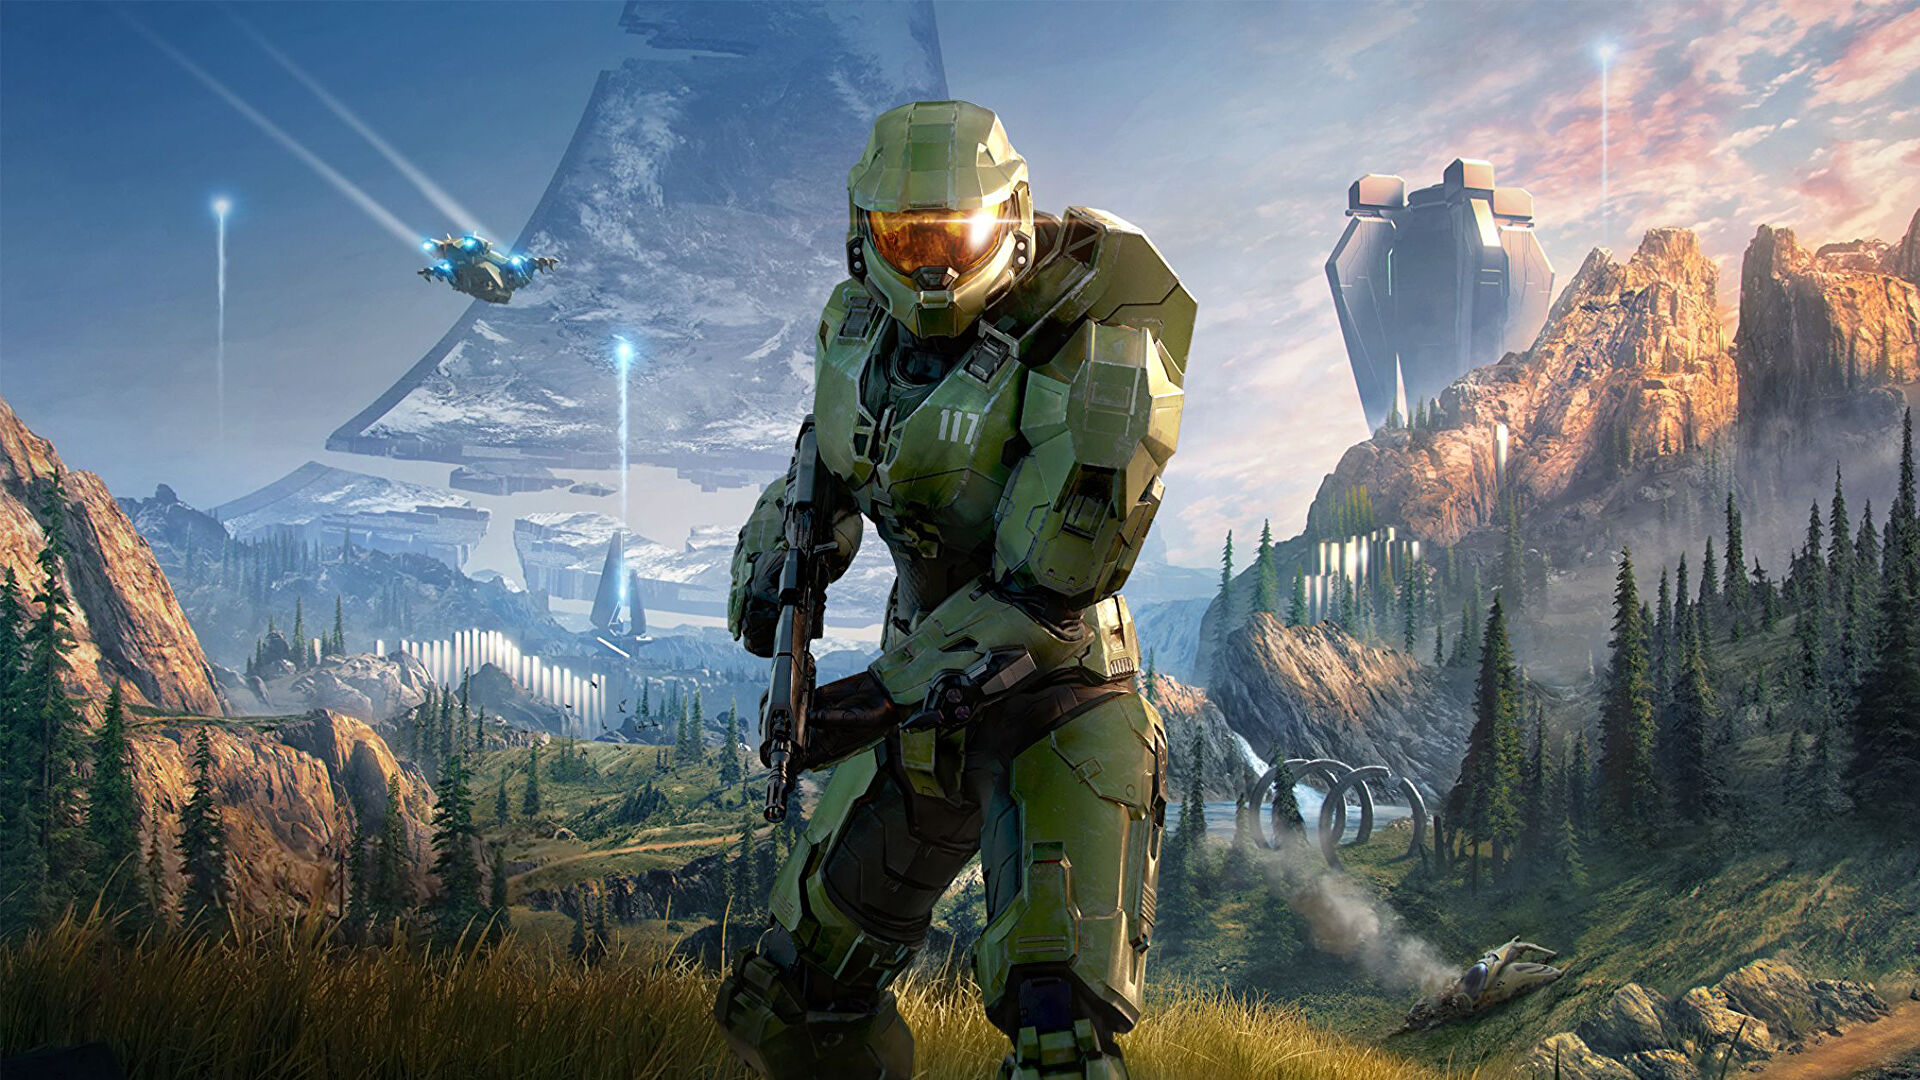 Rumoured Halo Infinite battle royale dev says upcoming project is “something big and new for the franchise”